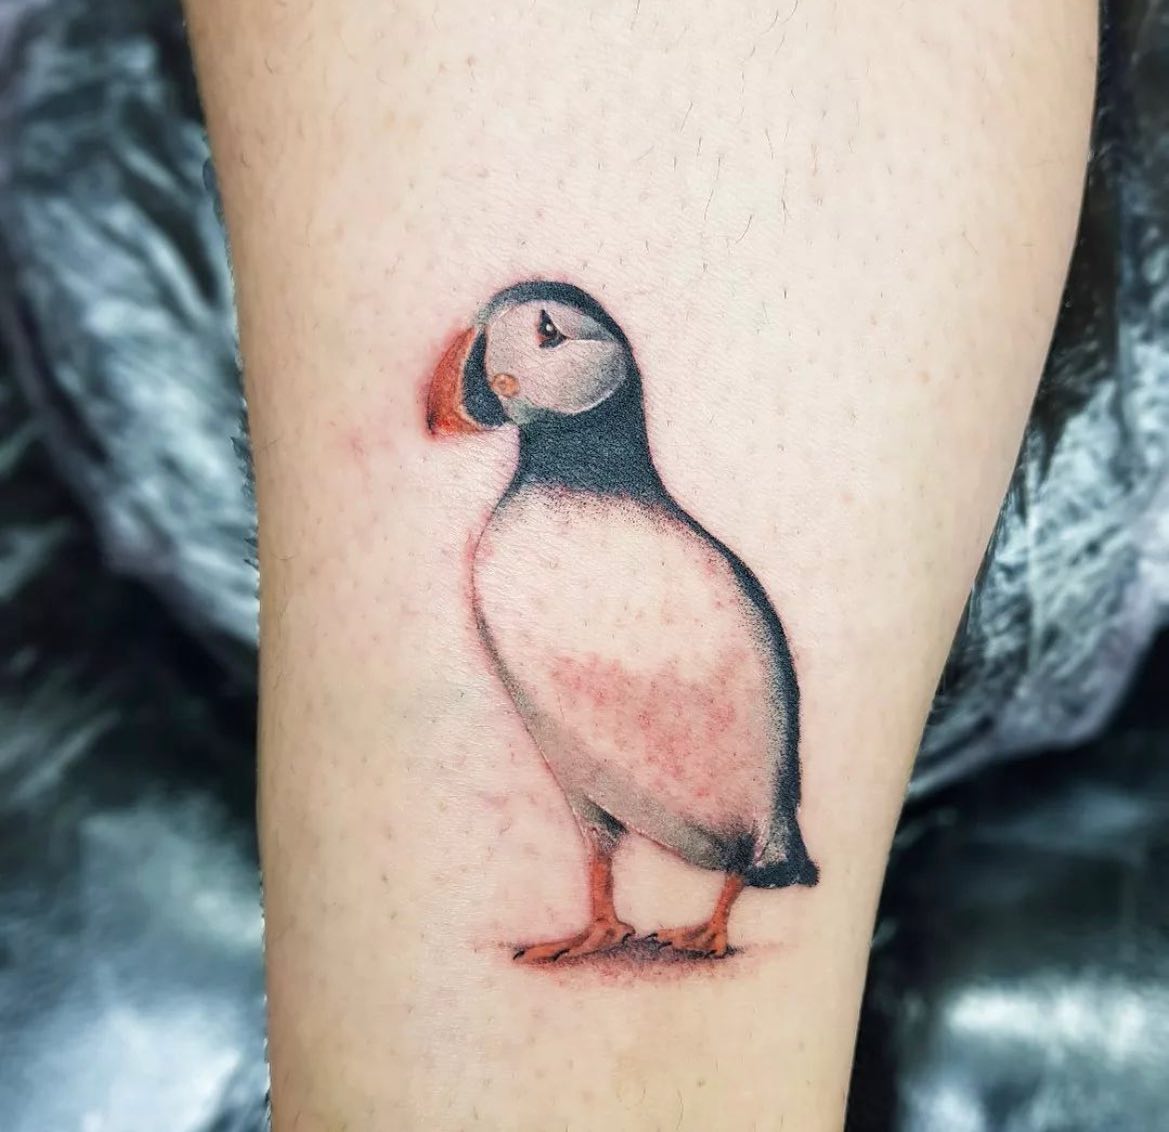 The cutest little puffin tattoo done by our amazing resident artist Matías🐧❣️

📲 - mat.n.tatau check out more of his style here! 

If you’d like to enquire about a tattoo done by Matías please fill out an enquiry form on our website or message him directly on his page ✨

                       